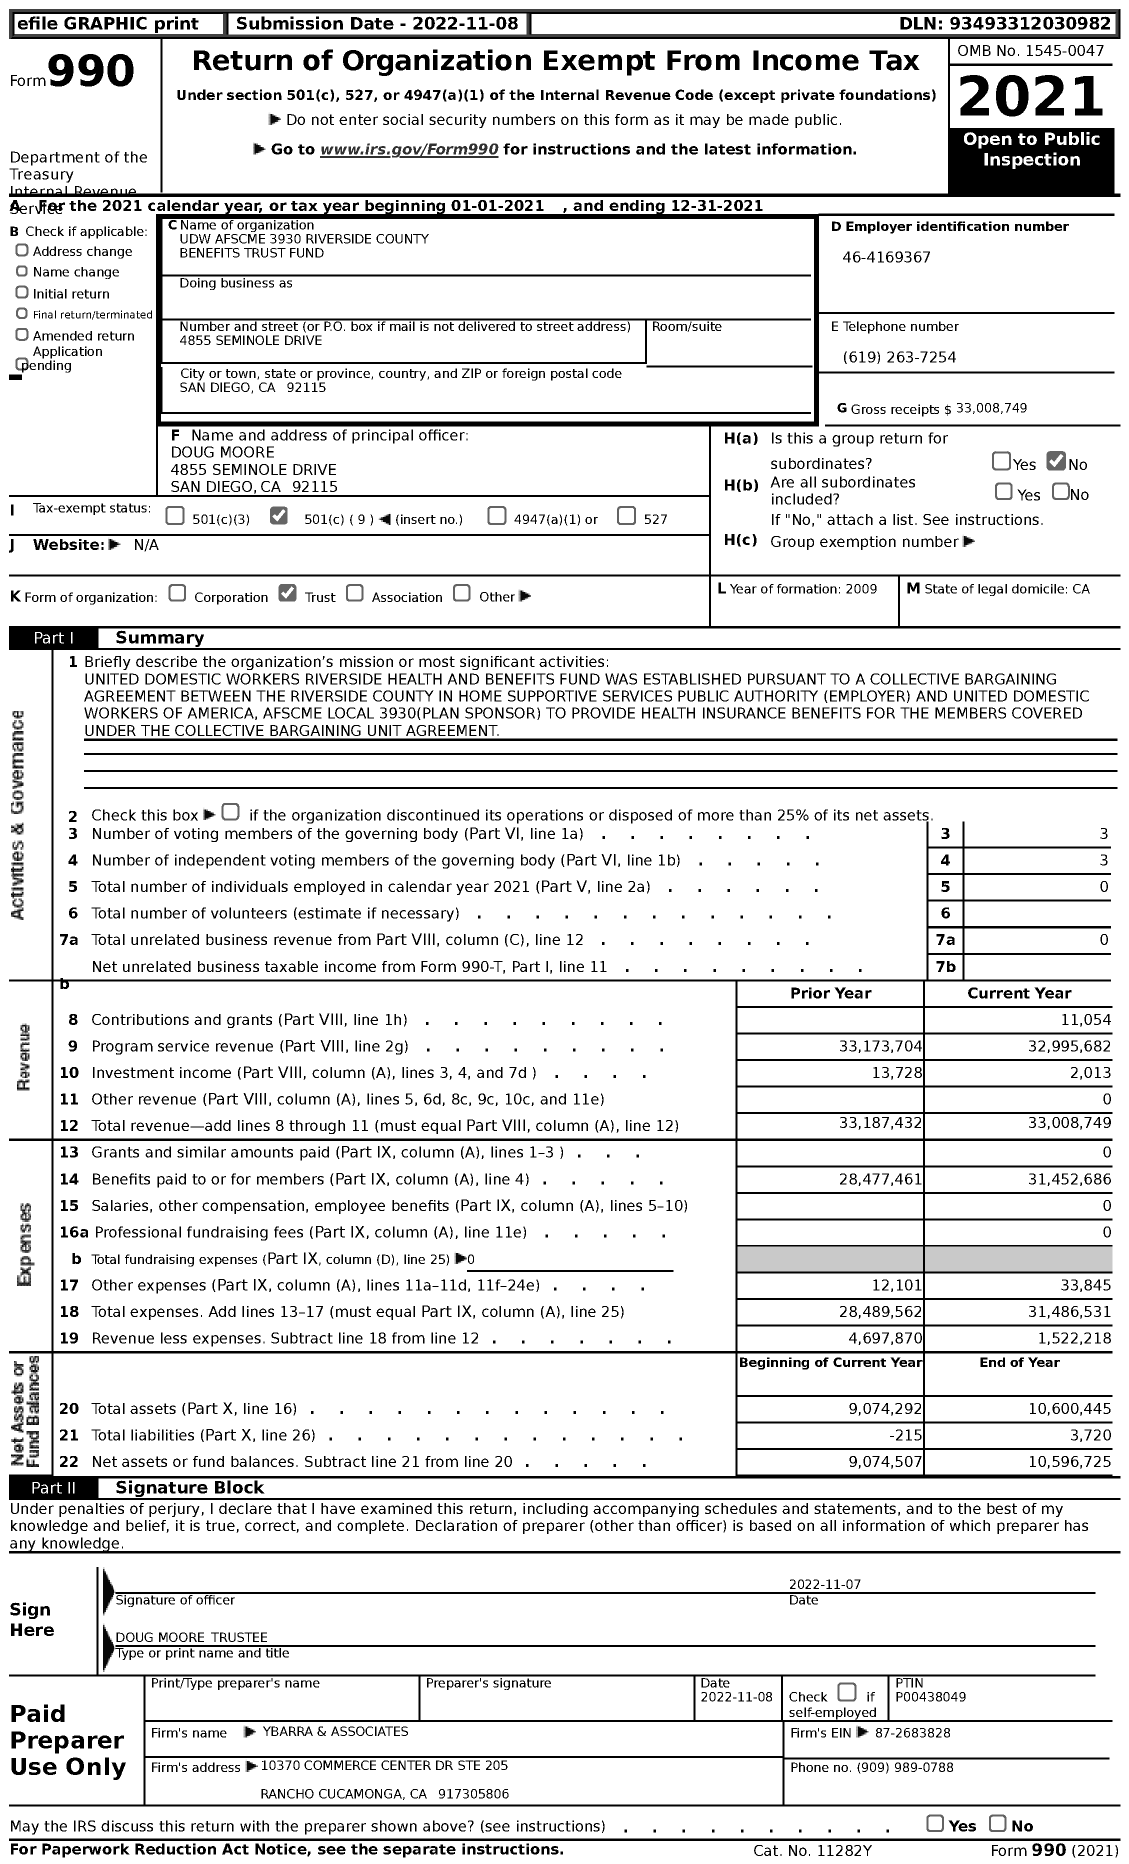 Image of first page of 2021 Form 990 for Udw AFSCME 3930 Riverside County Benefits Trust Fund